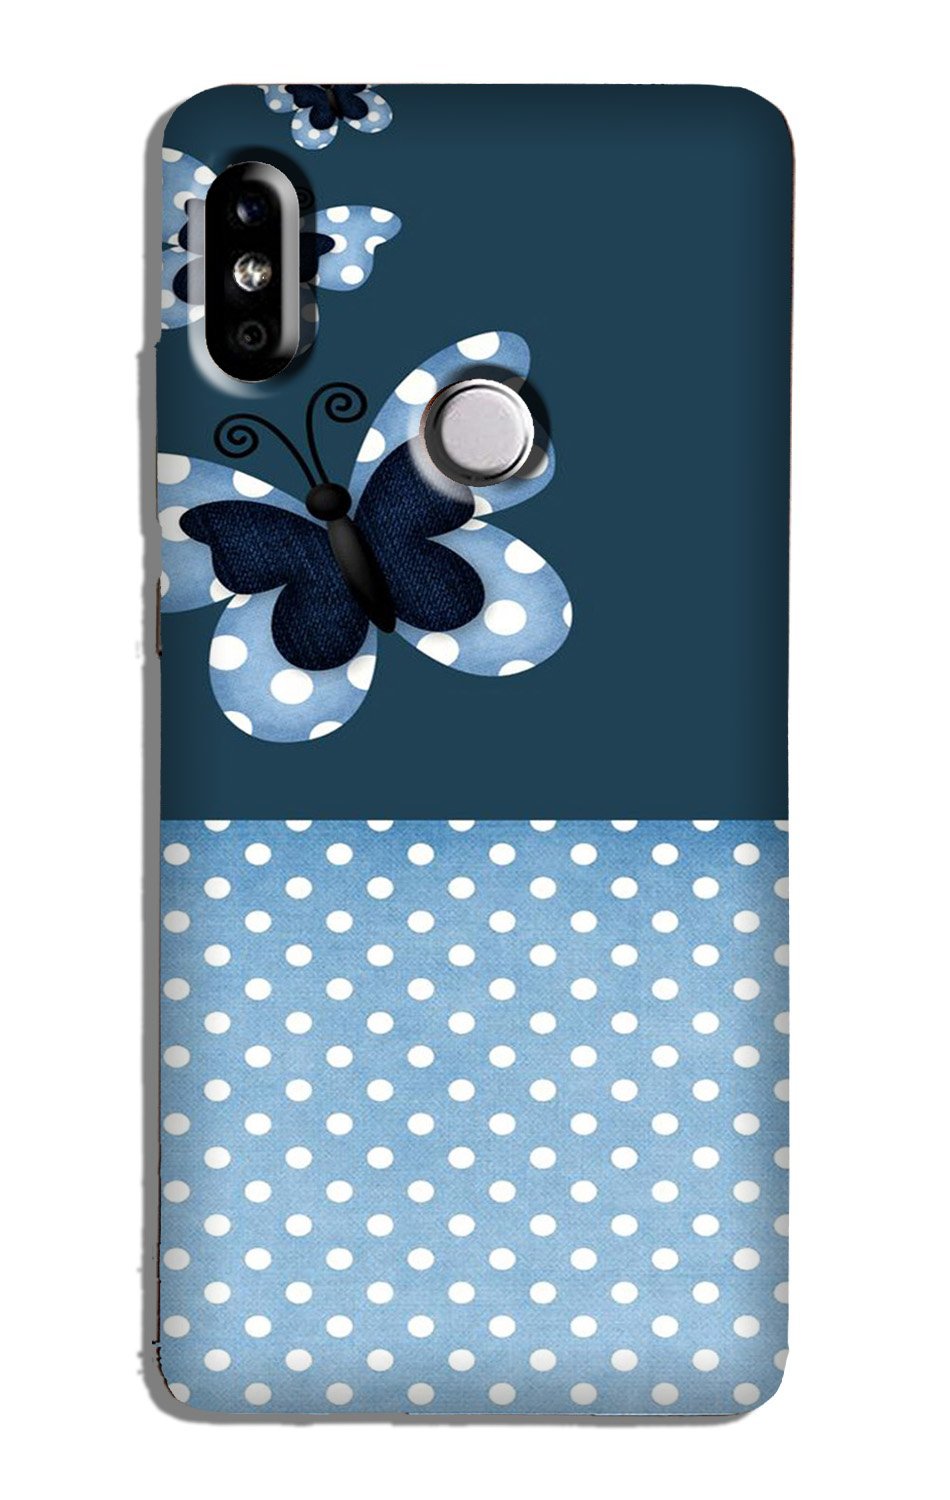 White dots Butterfly Case for Redmi Note 5 Pro